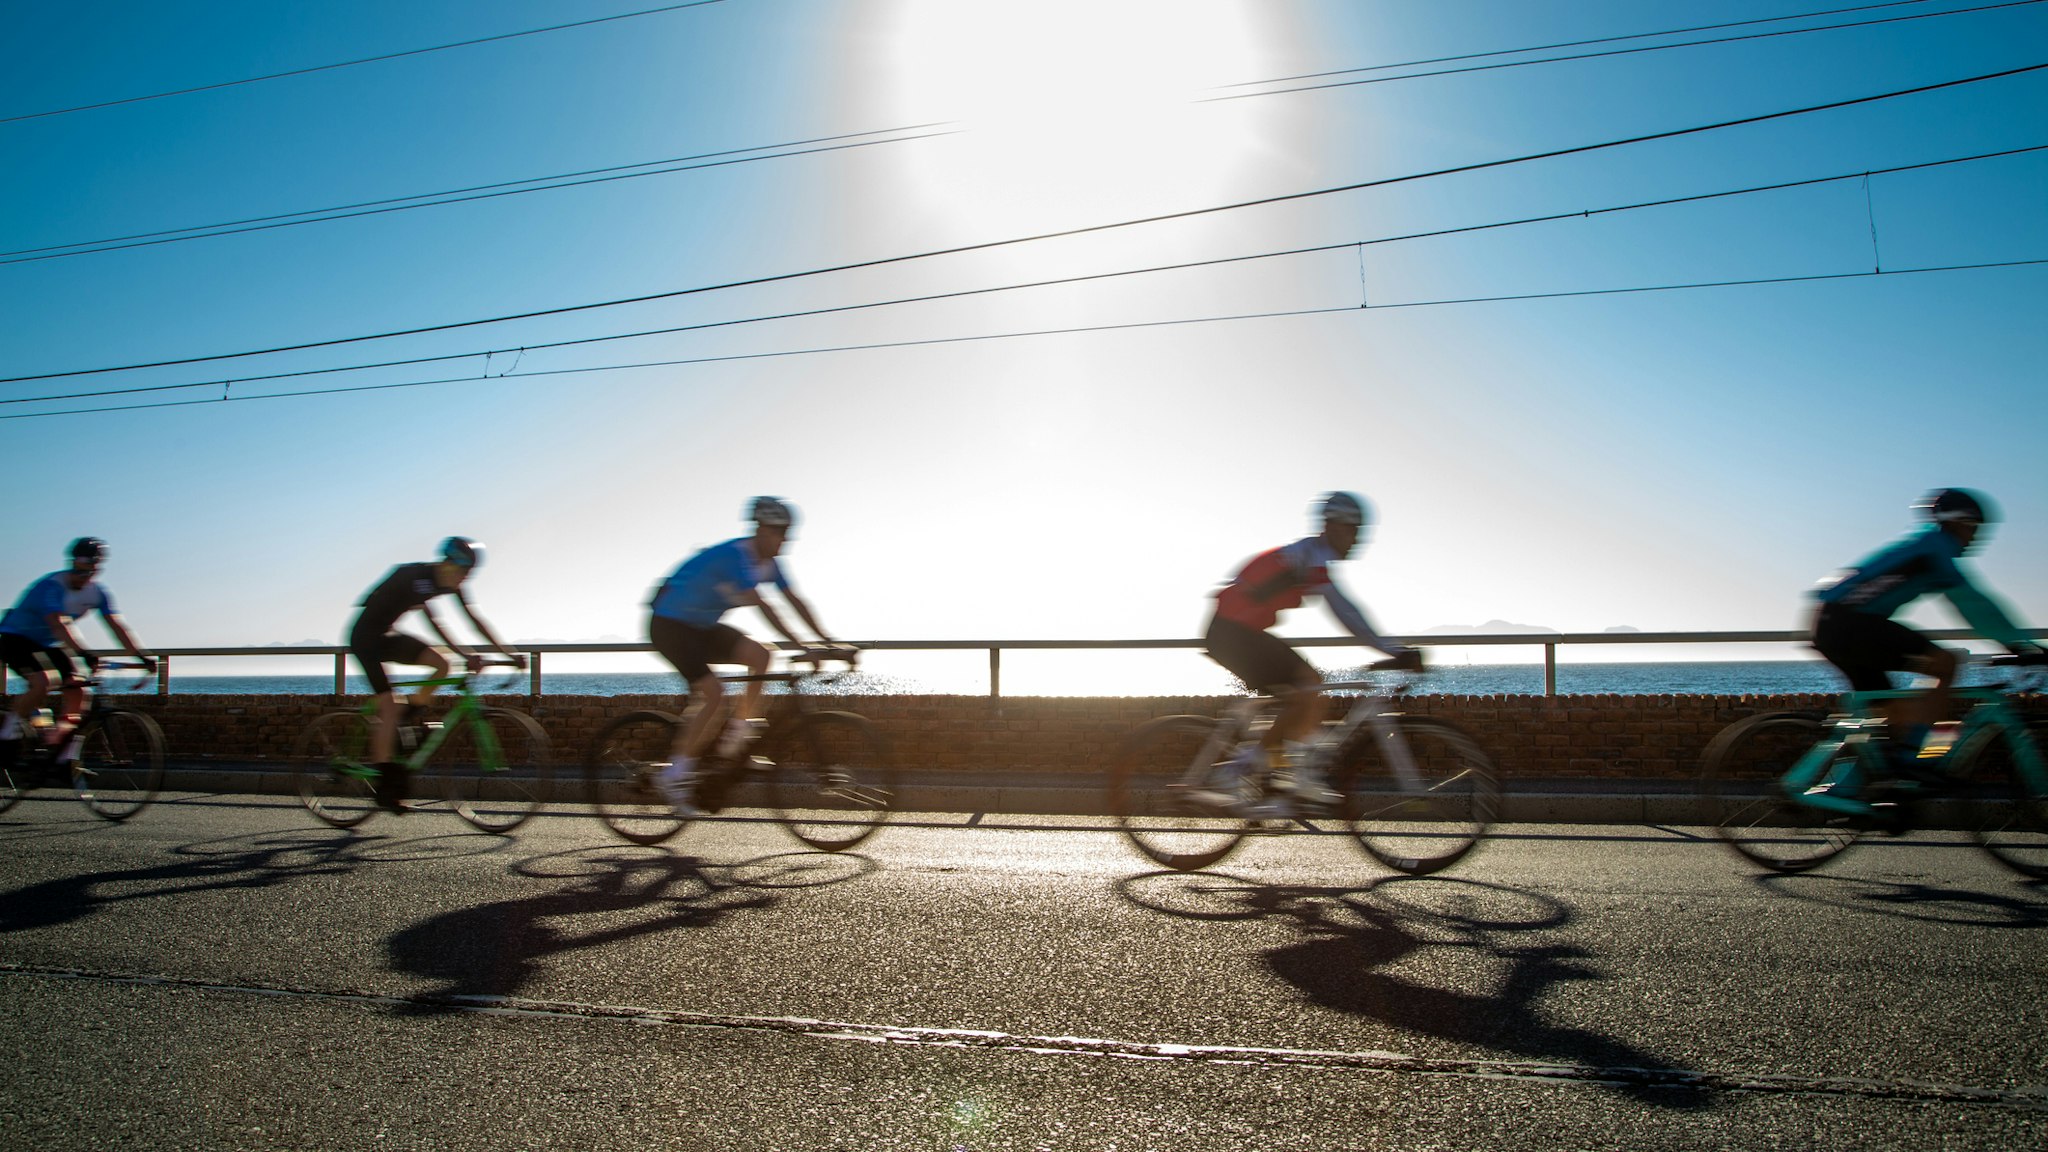 Group of blurred riders in a mass participation cycle race - stock photo